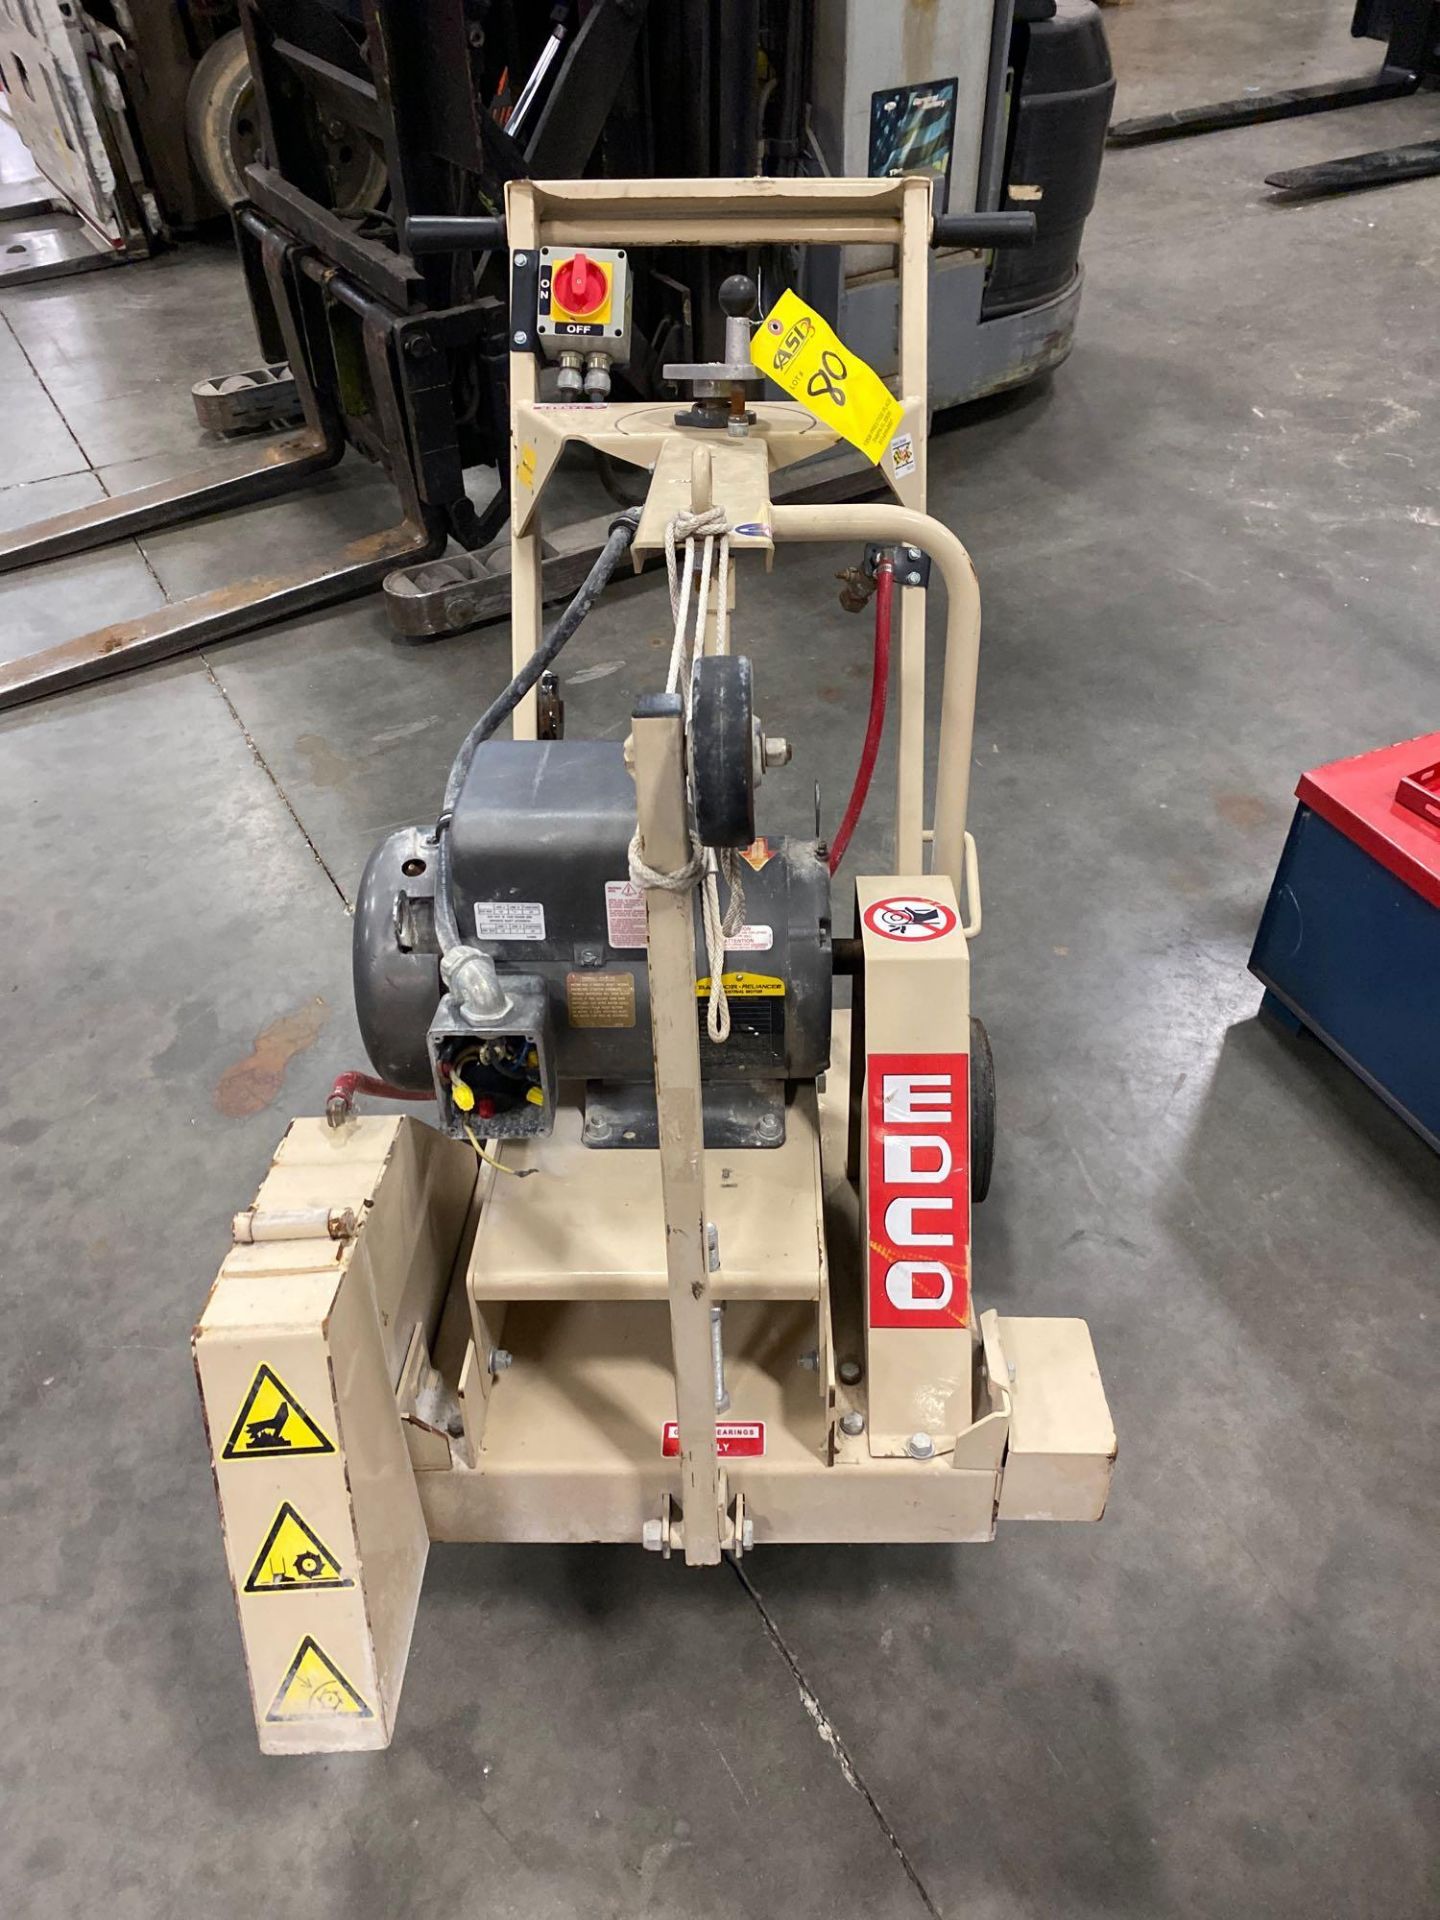 2017 EDCO DS-18-5 WALKBEHIND SAW SUPPORT EQUIPMENT - Image 15 of 20